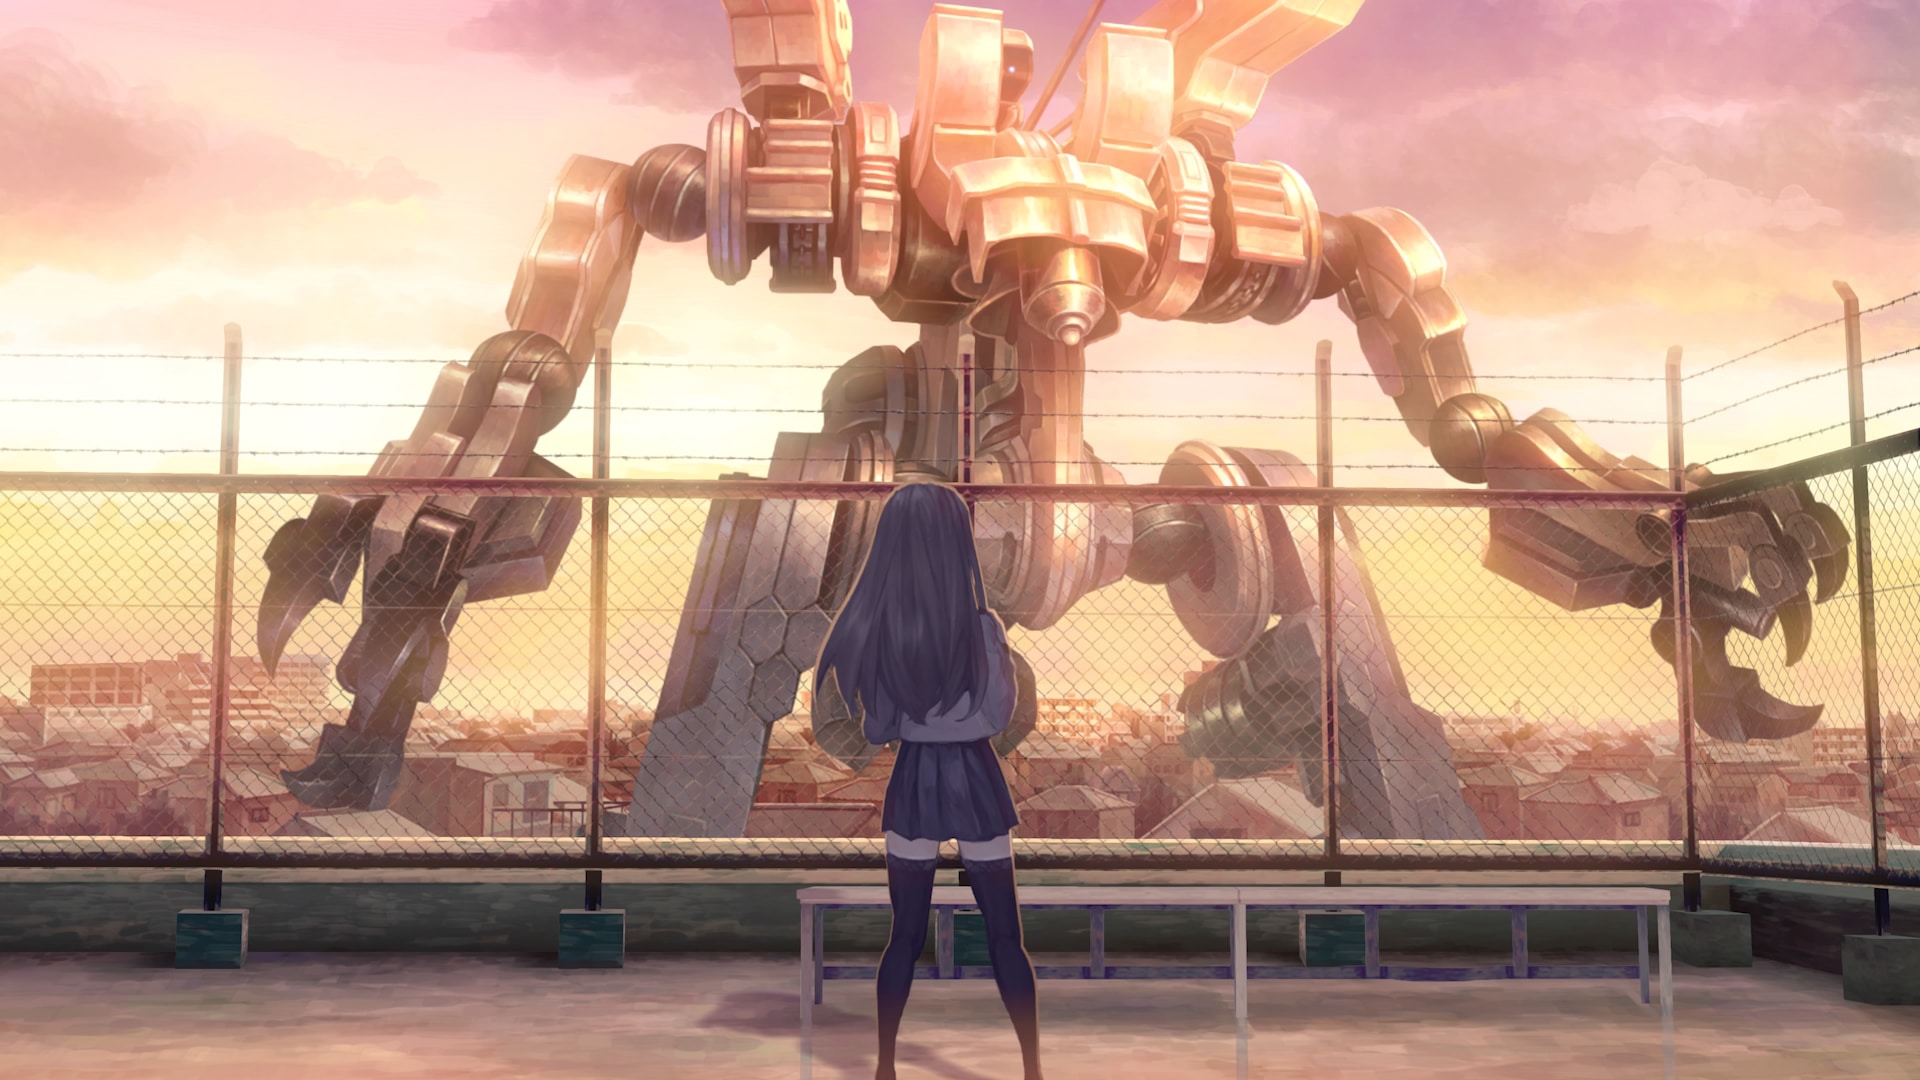 13 Sentinels: Aegis Rim Gets Slight Delay, but English Patch Audio Now Available Day One